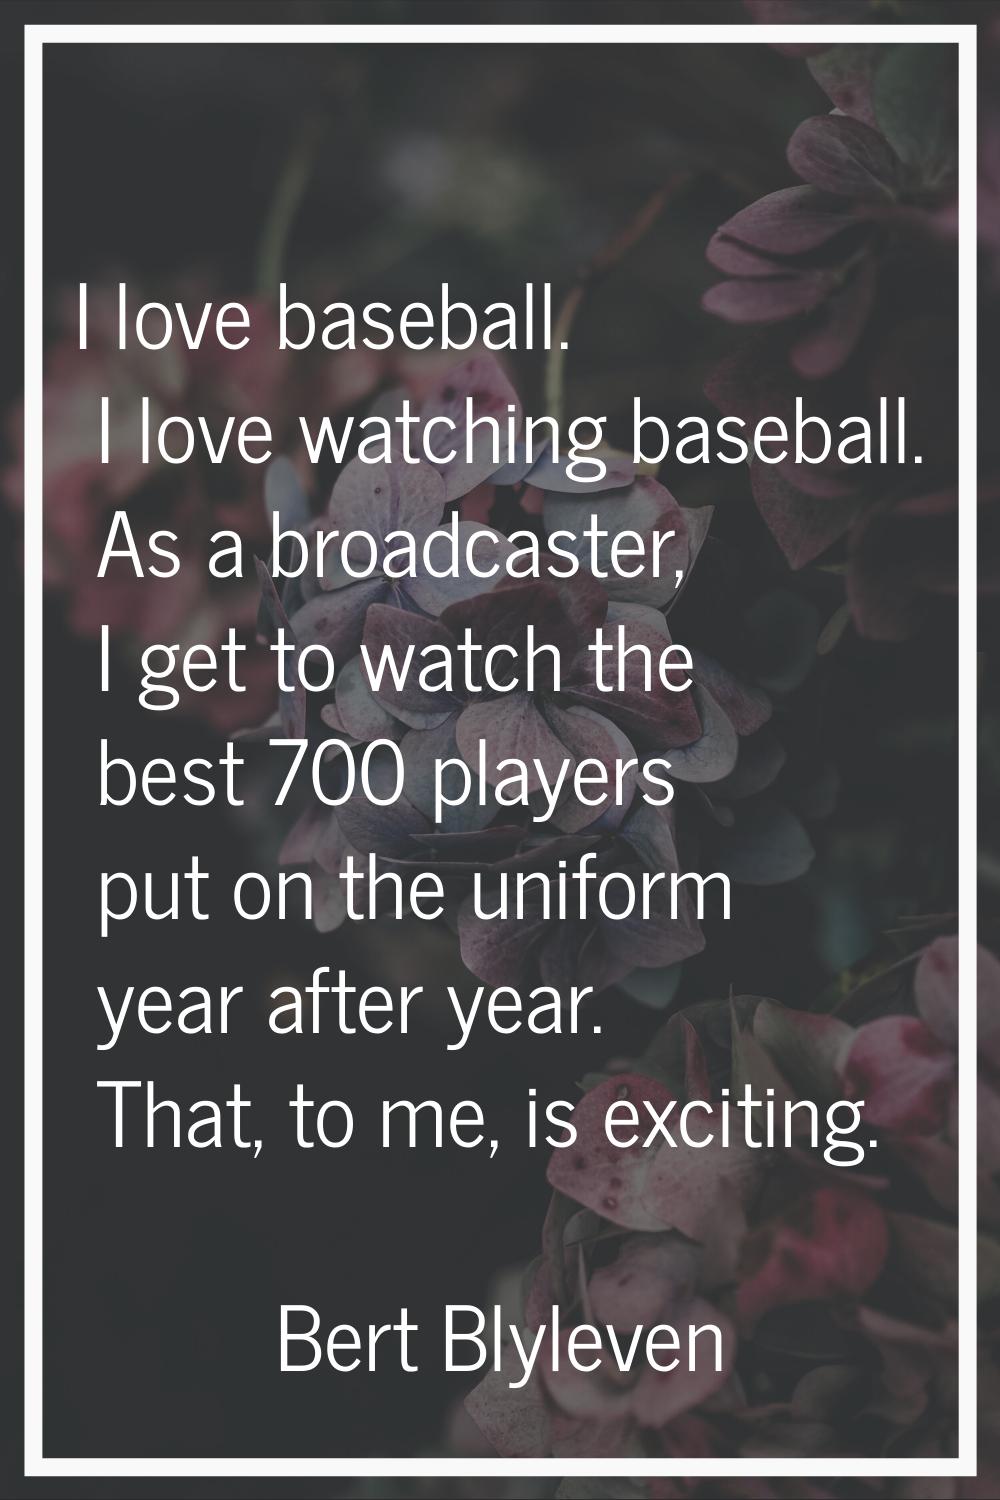 I love baseball. I love watching baseball. As a broadcaster, I get to watch the best 700 players pu